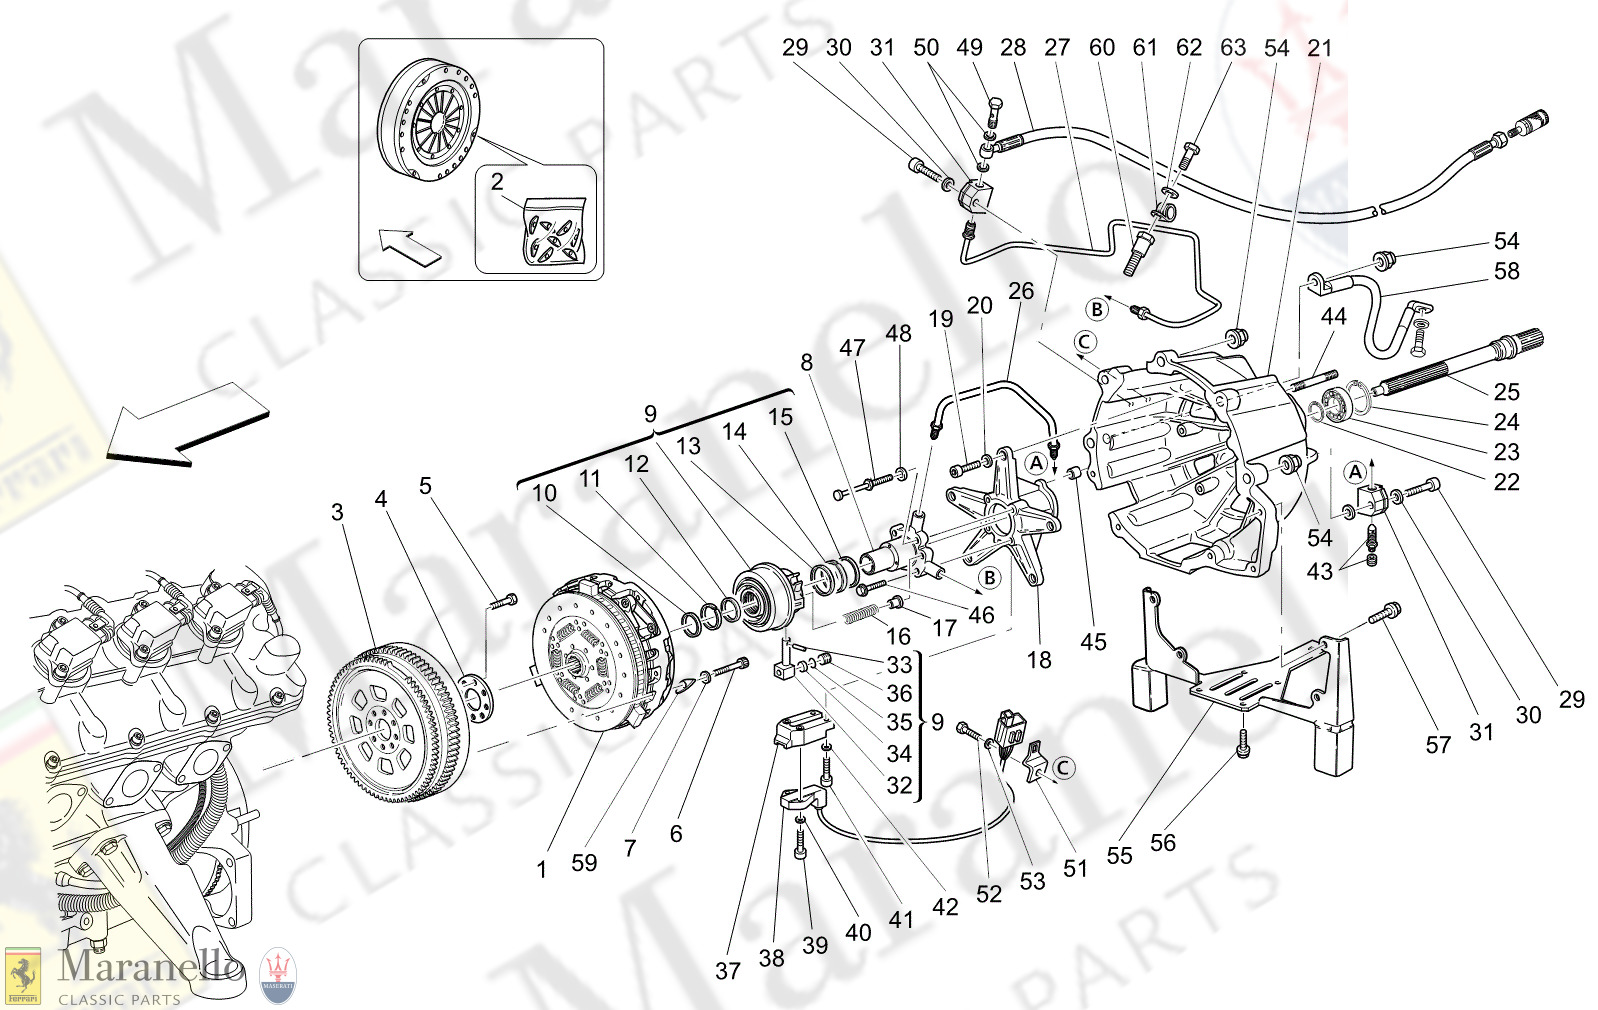 M2.11 - 14 - M211 - 14 Friction Discs And Housing For F1 Gearbox